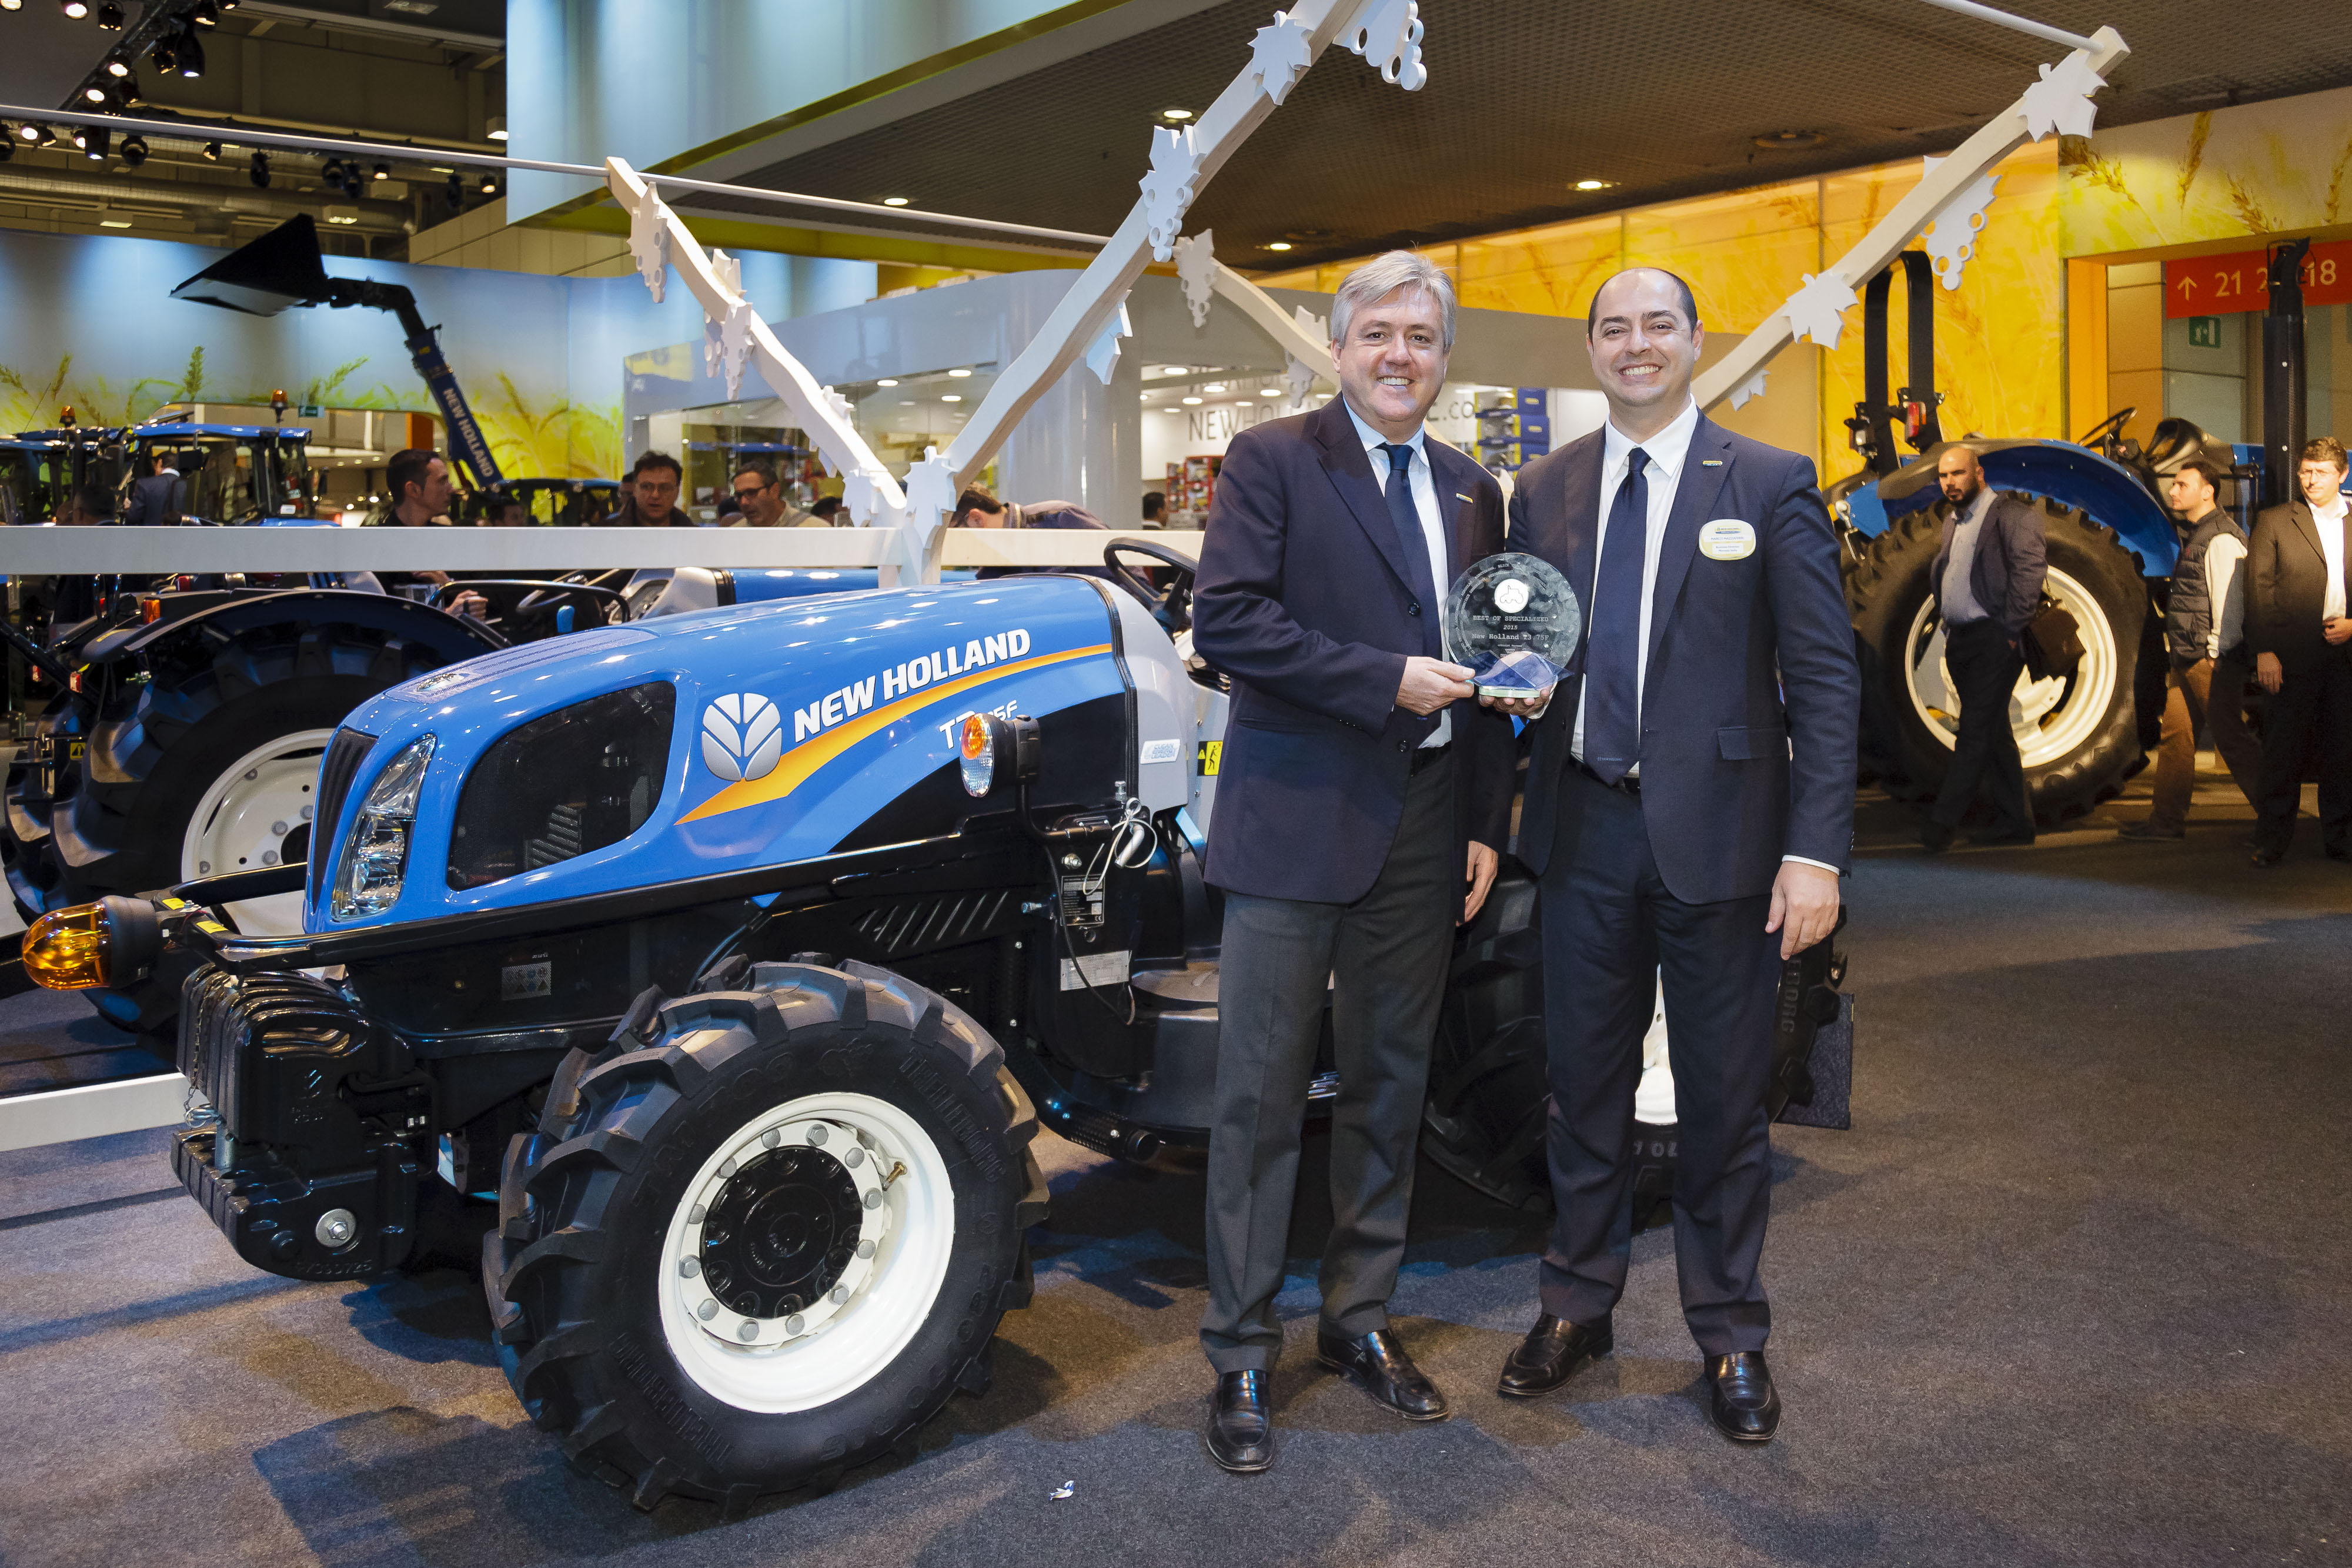  New Holland vince il premio TOTY(r) 2015 per il trattore “Best of Specialised”